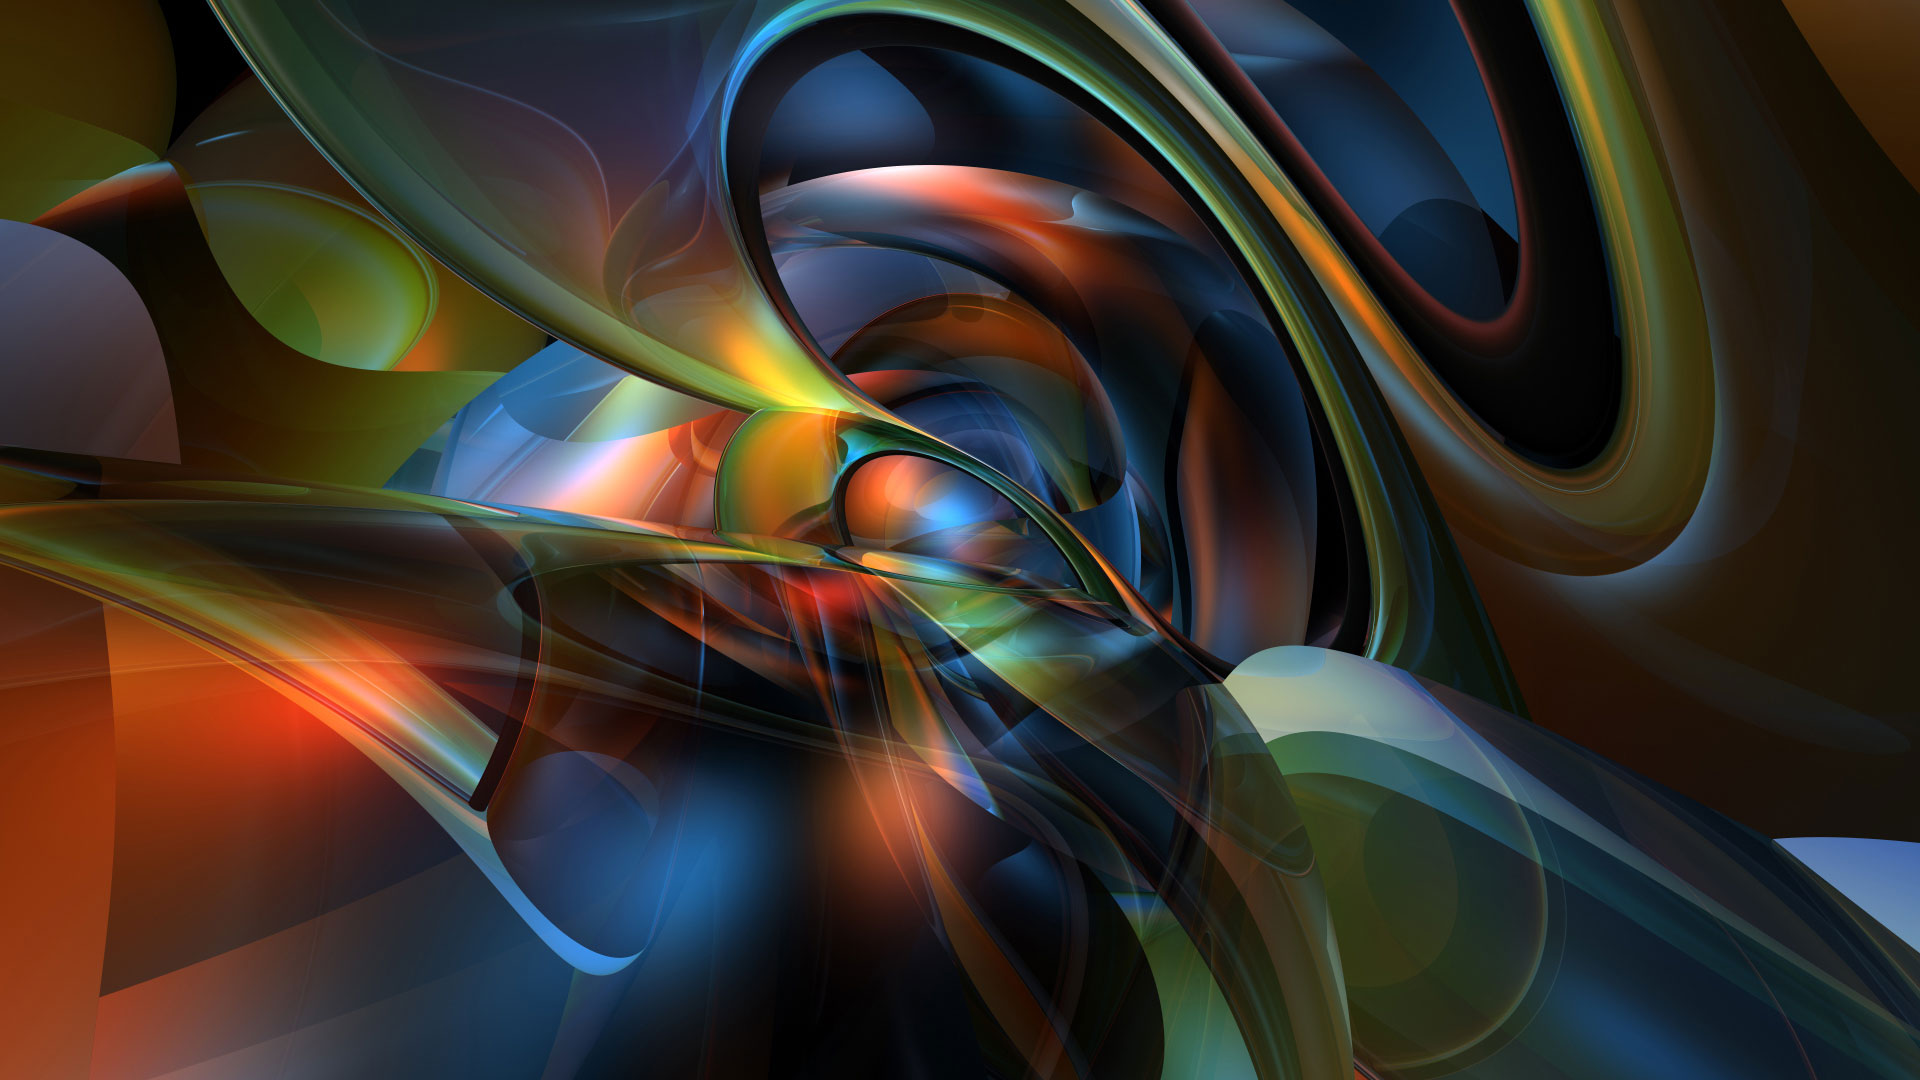 3d Abstract Wallpaper 9599 Hd Wallpapers in 3D   Imagescicom